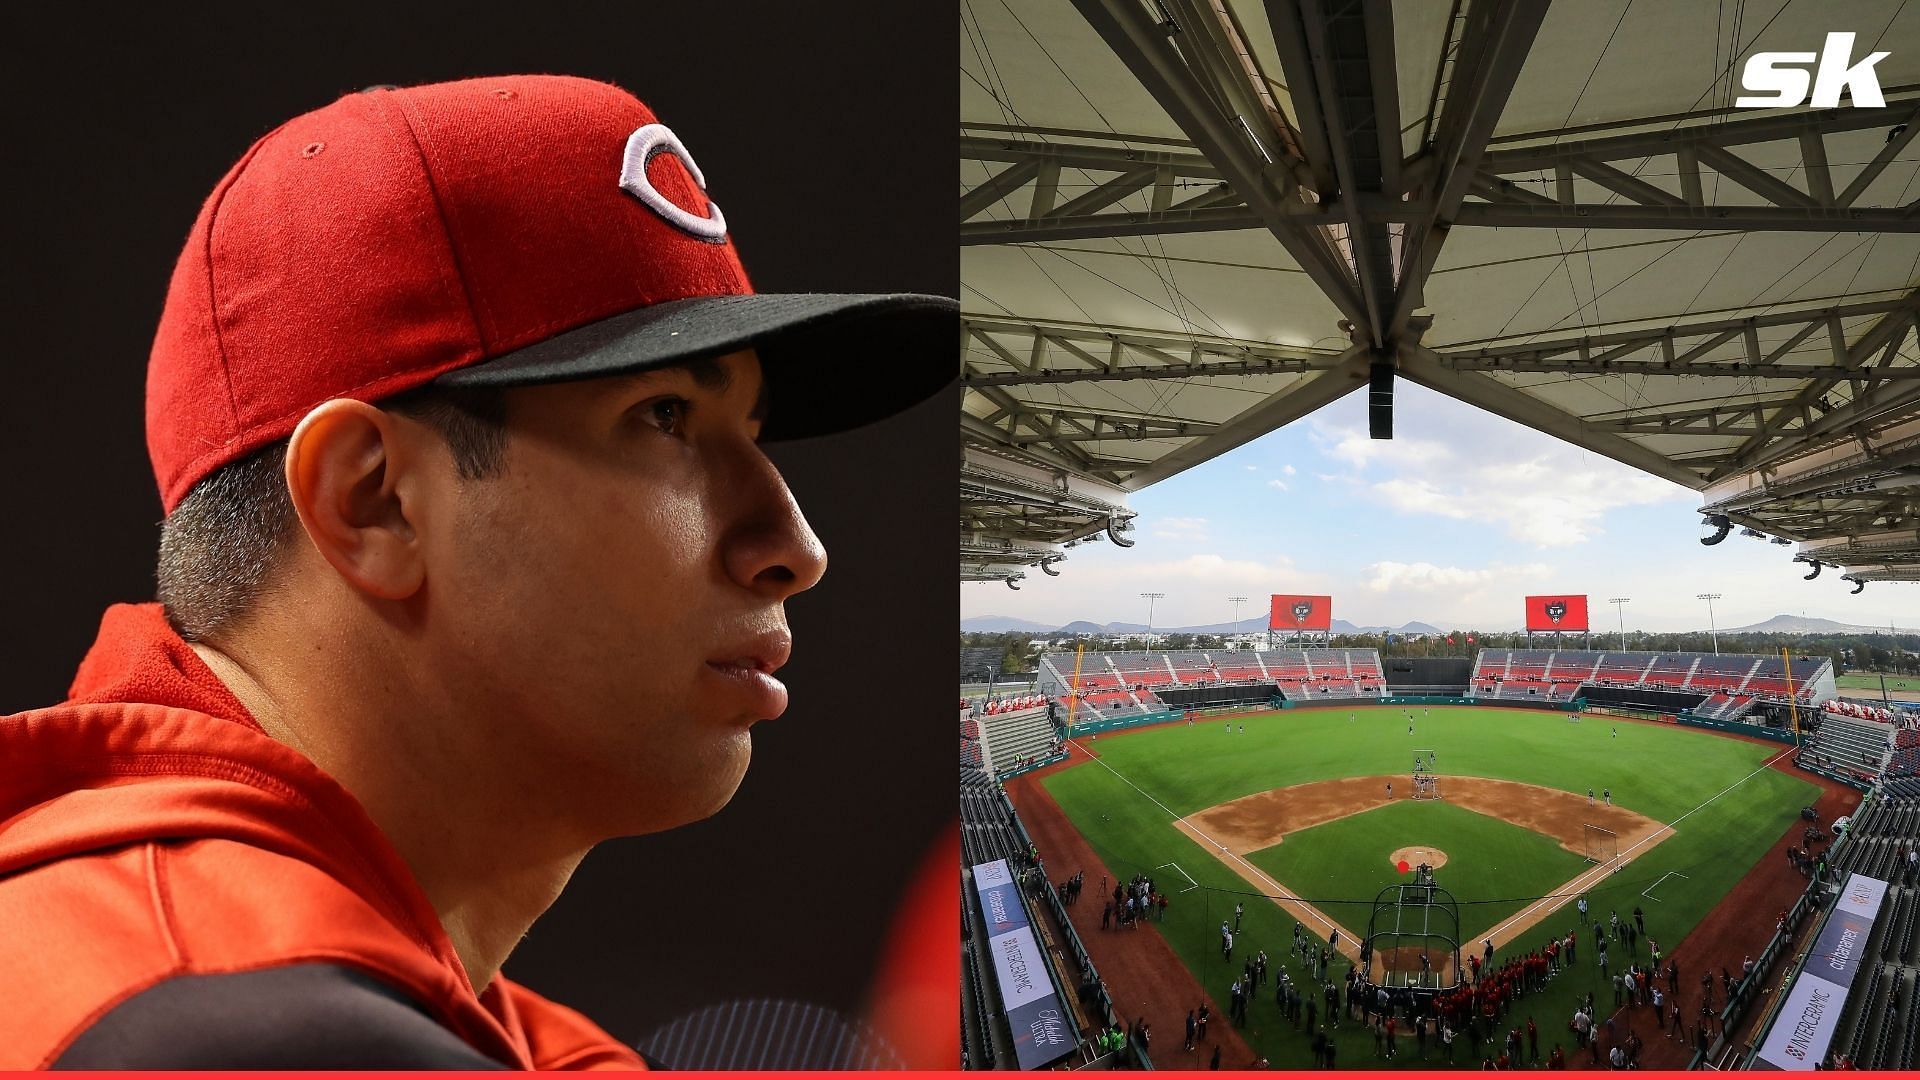 Royals pitcher Luis Cessa is excited to see the Yankees take on the Diablos Rojos in Mexico